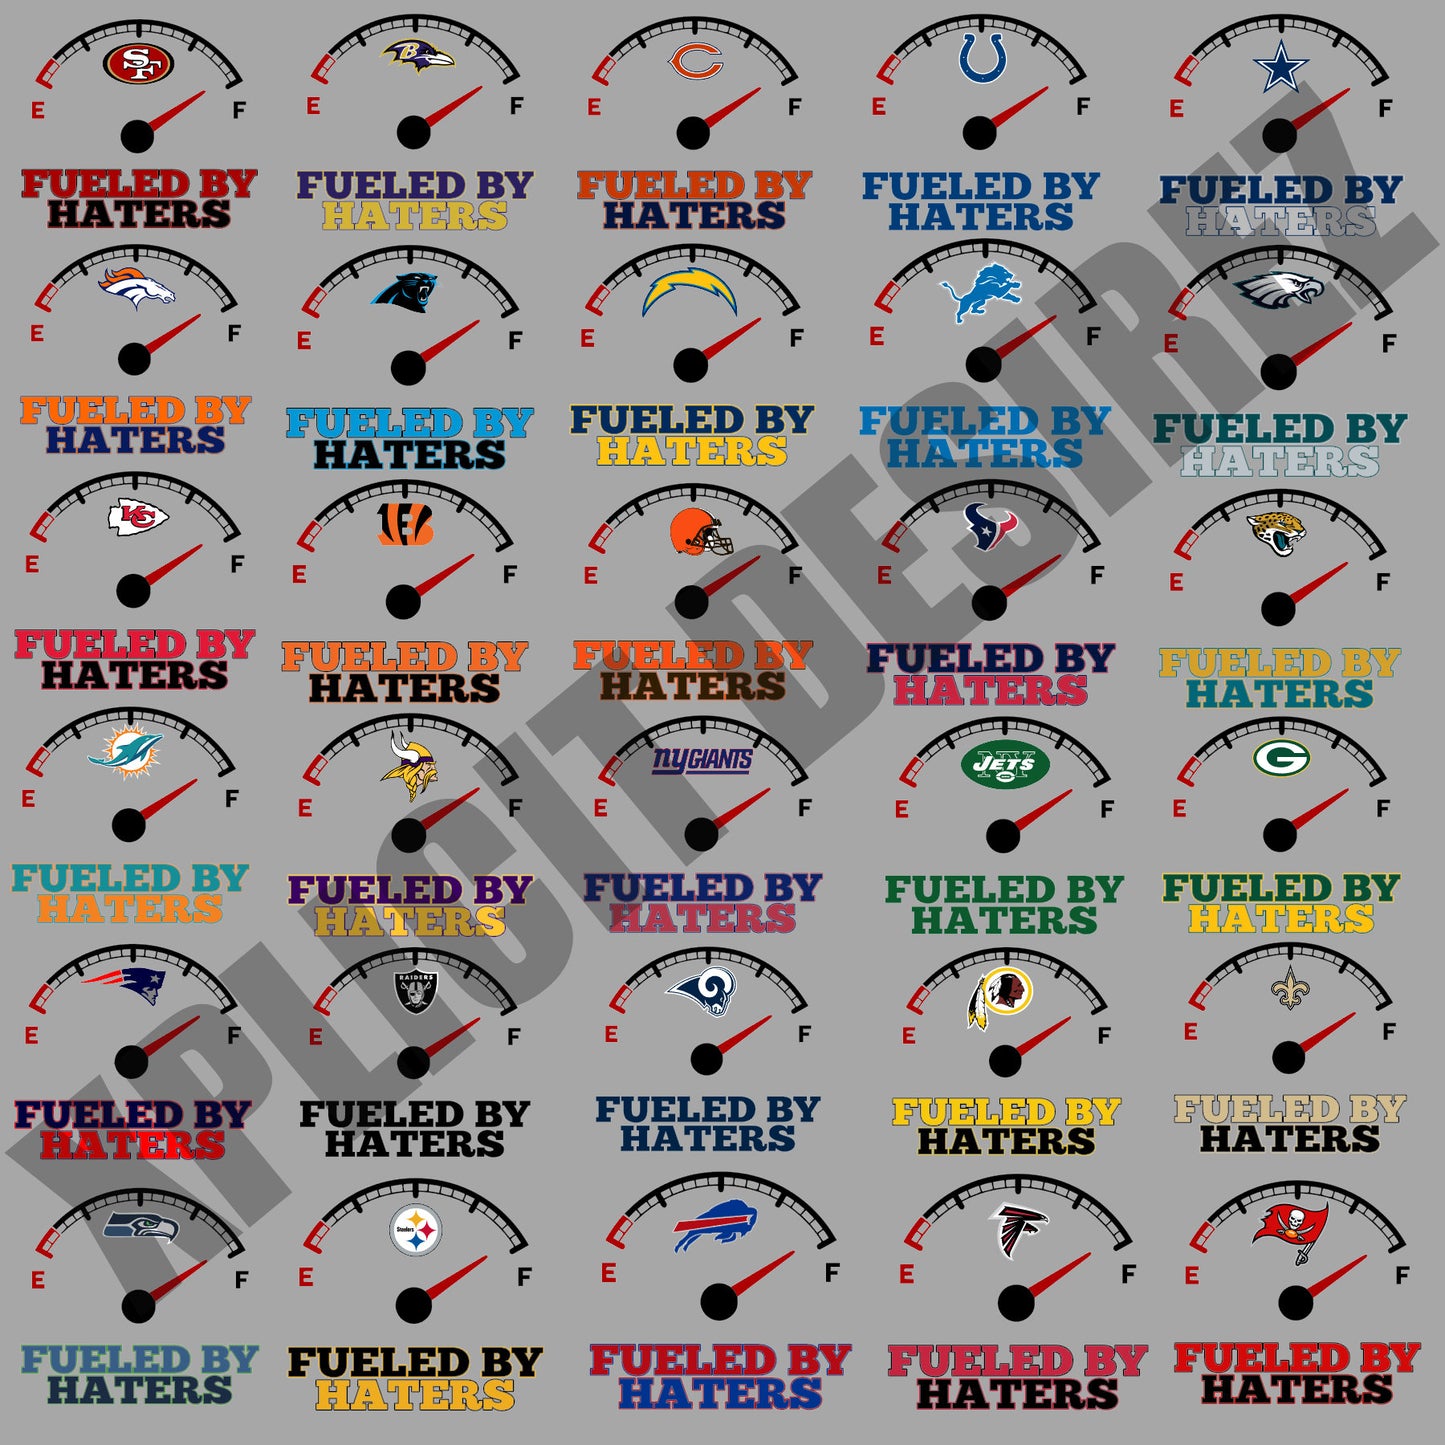 NFL Fueled by haters all teams included.